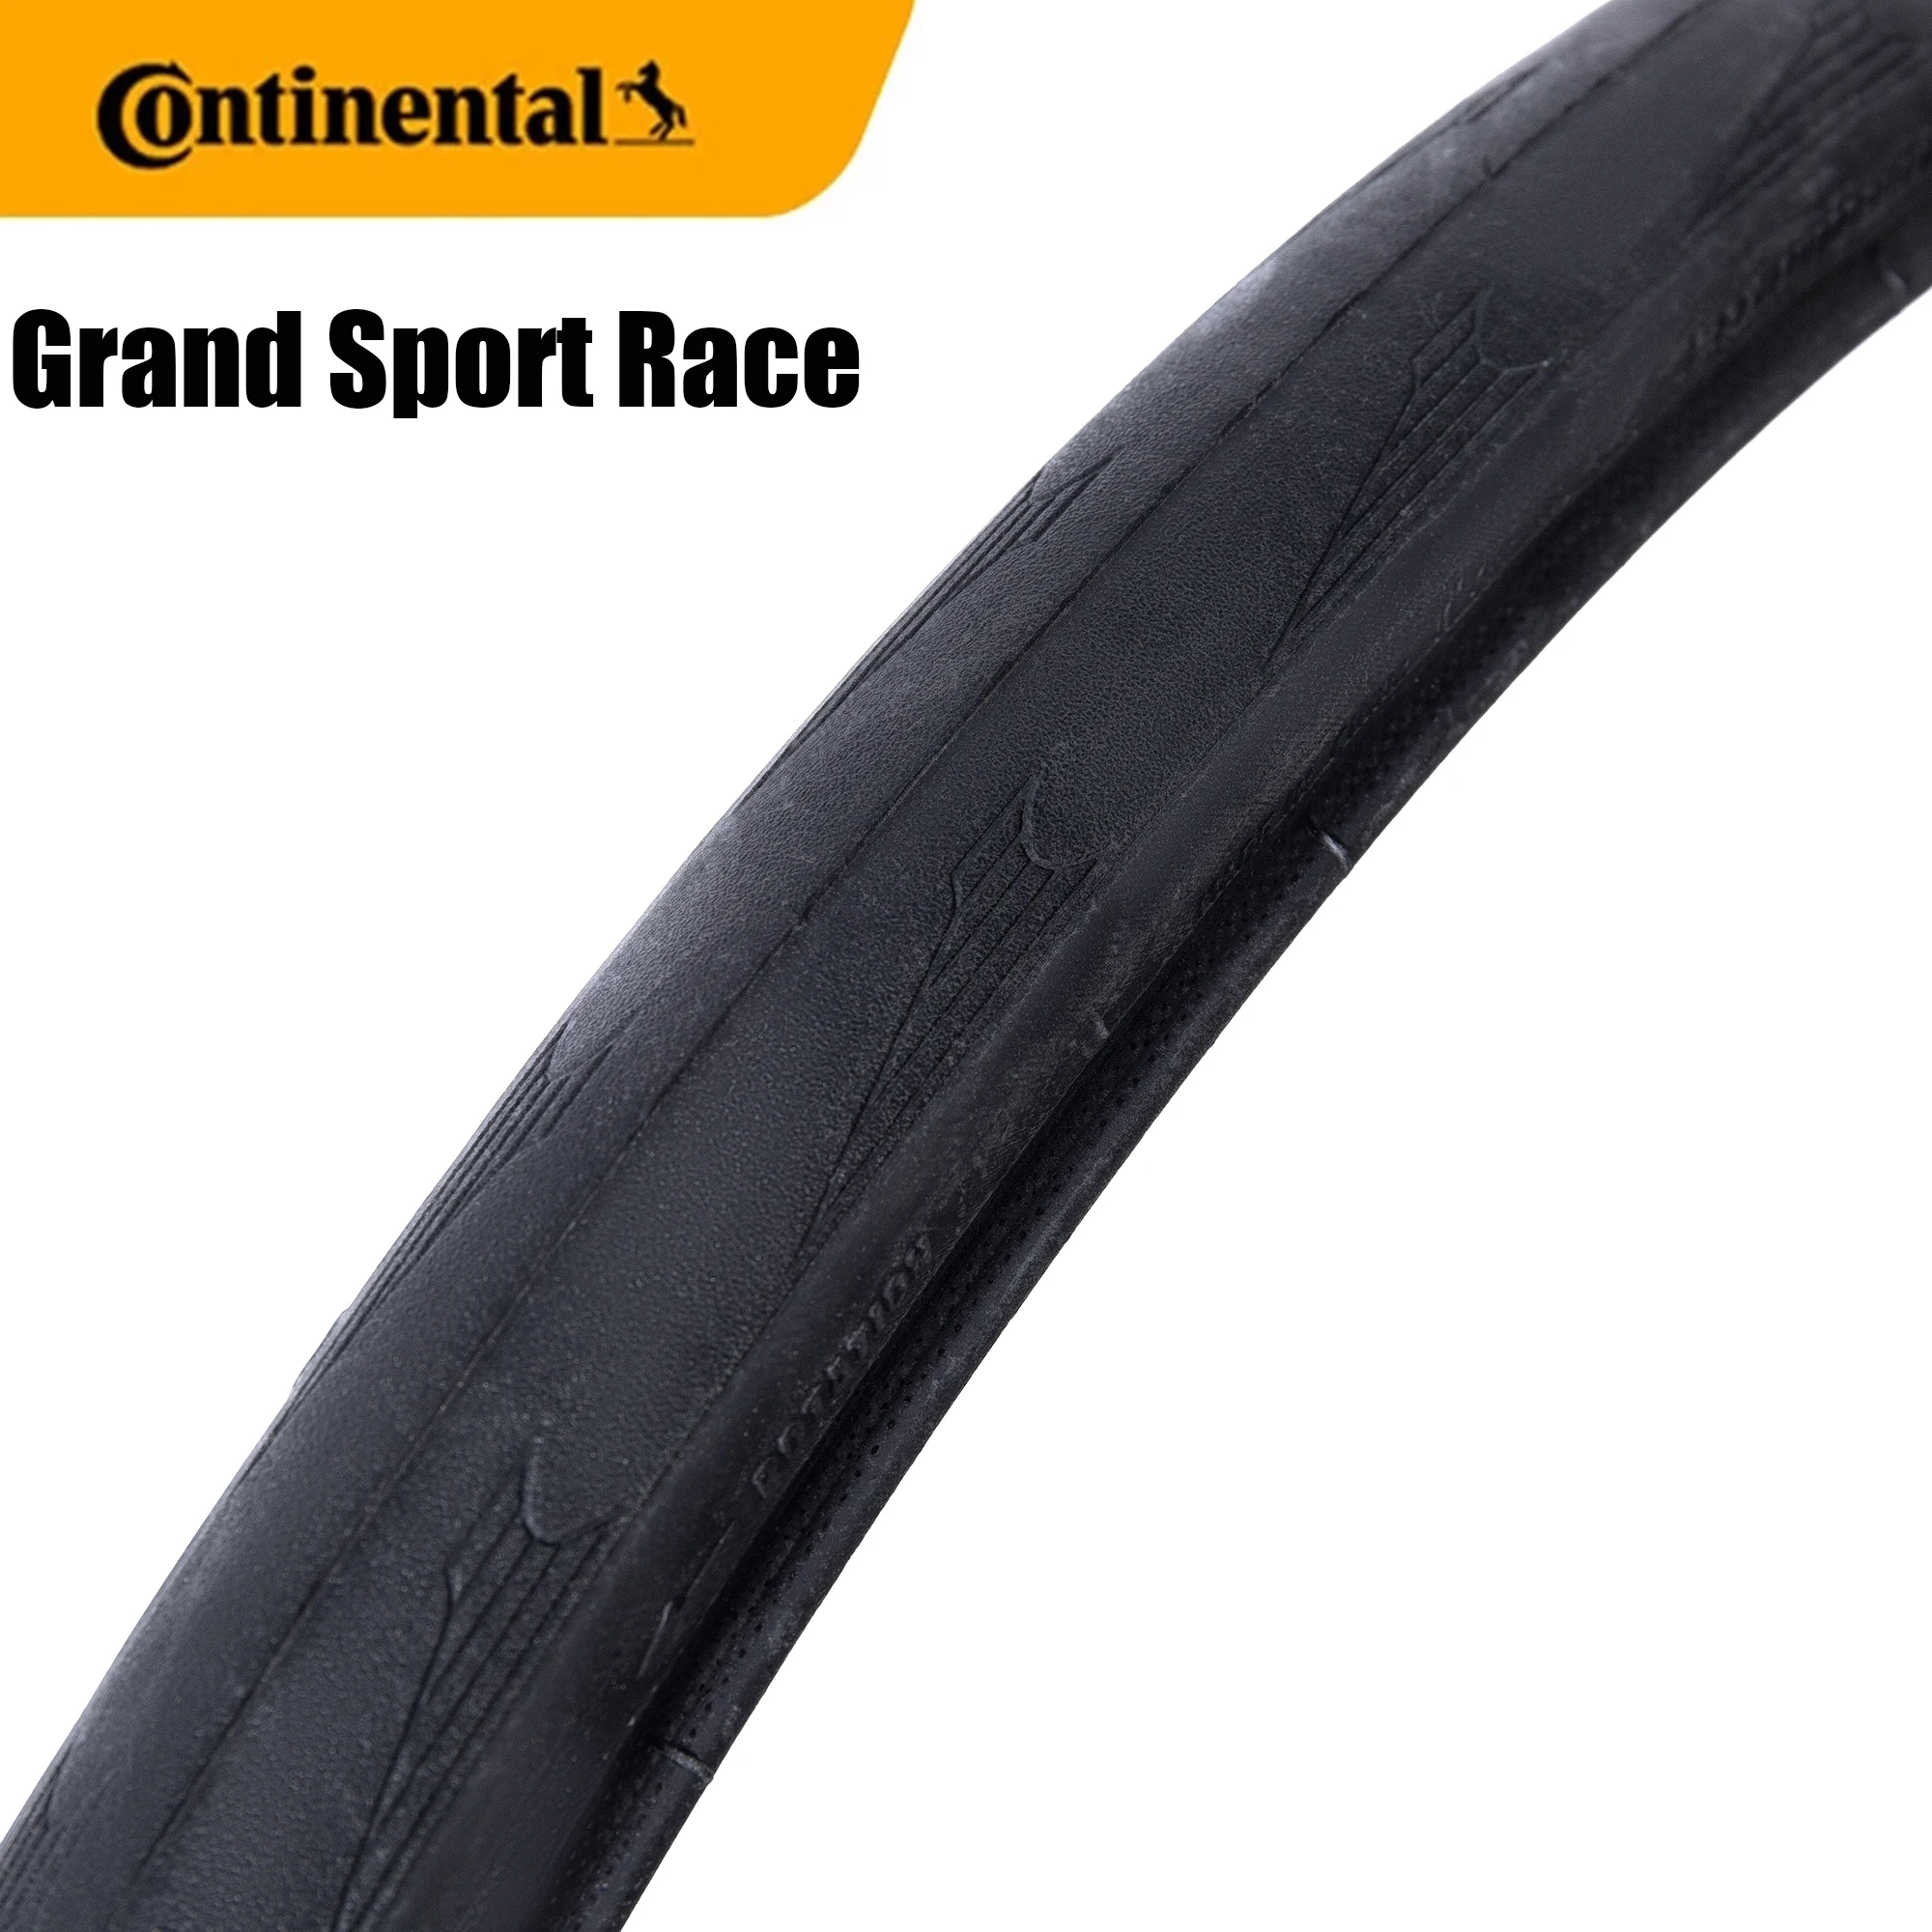  Continental Grand Sport Race All Rounder Bicycle 700x25  NyTechBreaker Folding Clincher - Pair (2 Tires) : Sports & Outdoors